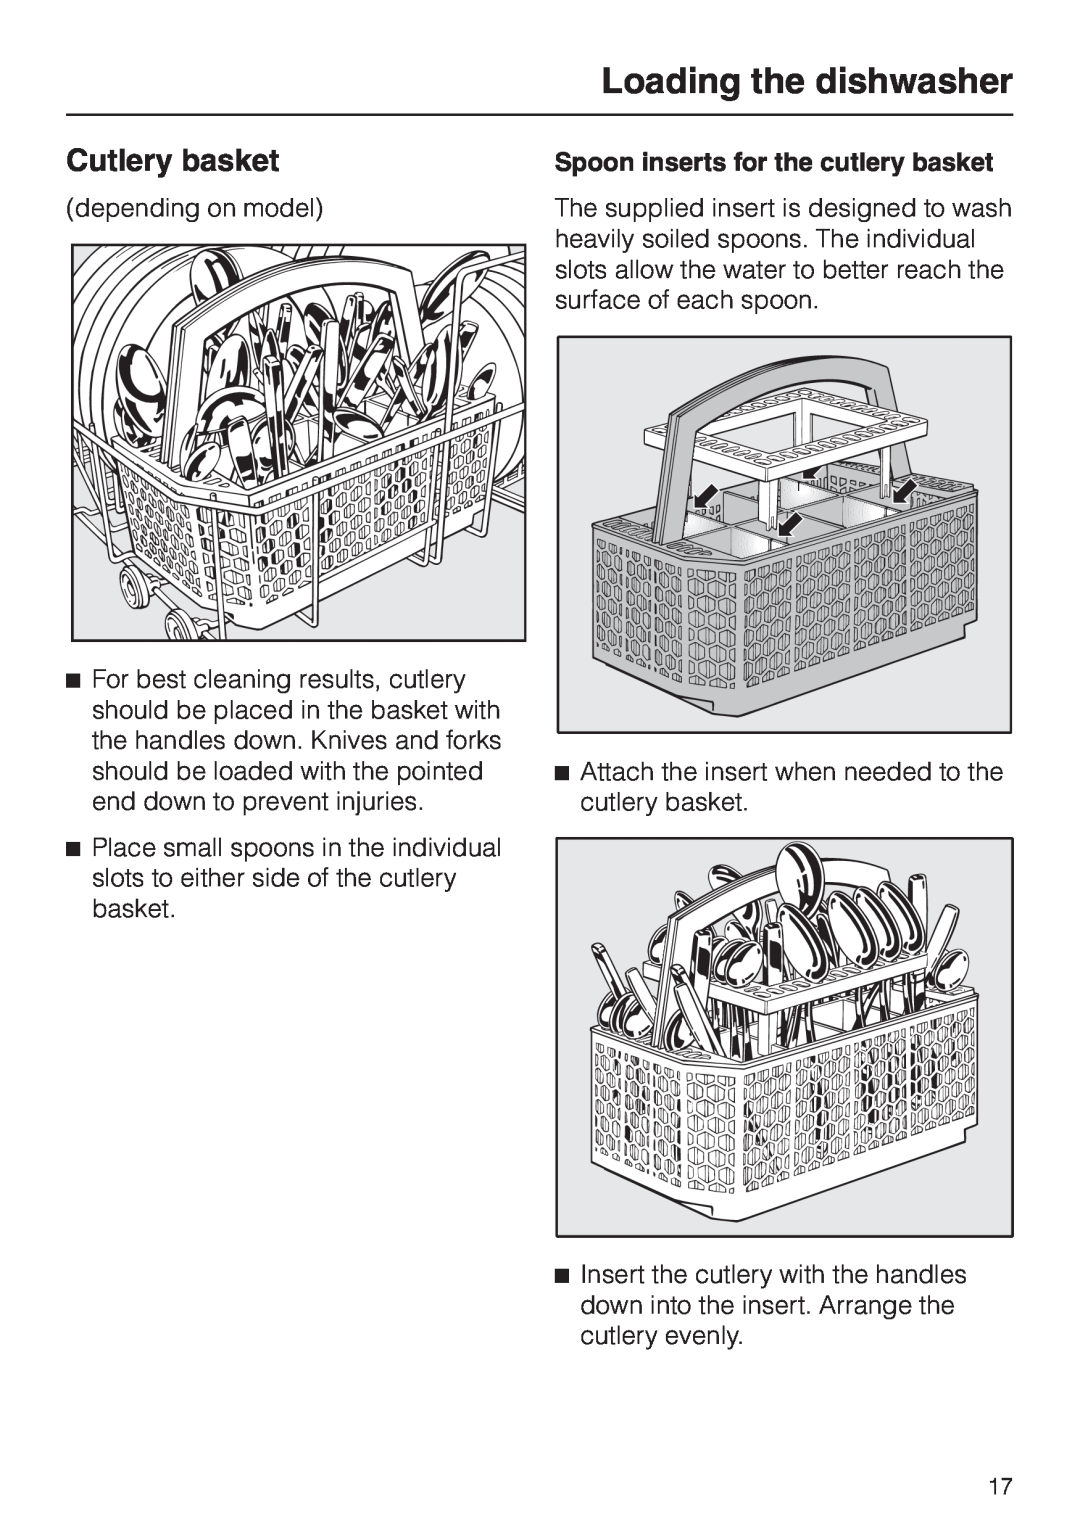 Miele G 1180 manual Cutlery basket, Loading the dishwasher, Spoon inserts for the cutlery basket 